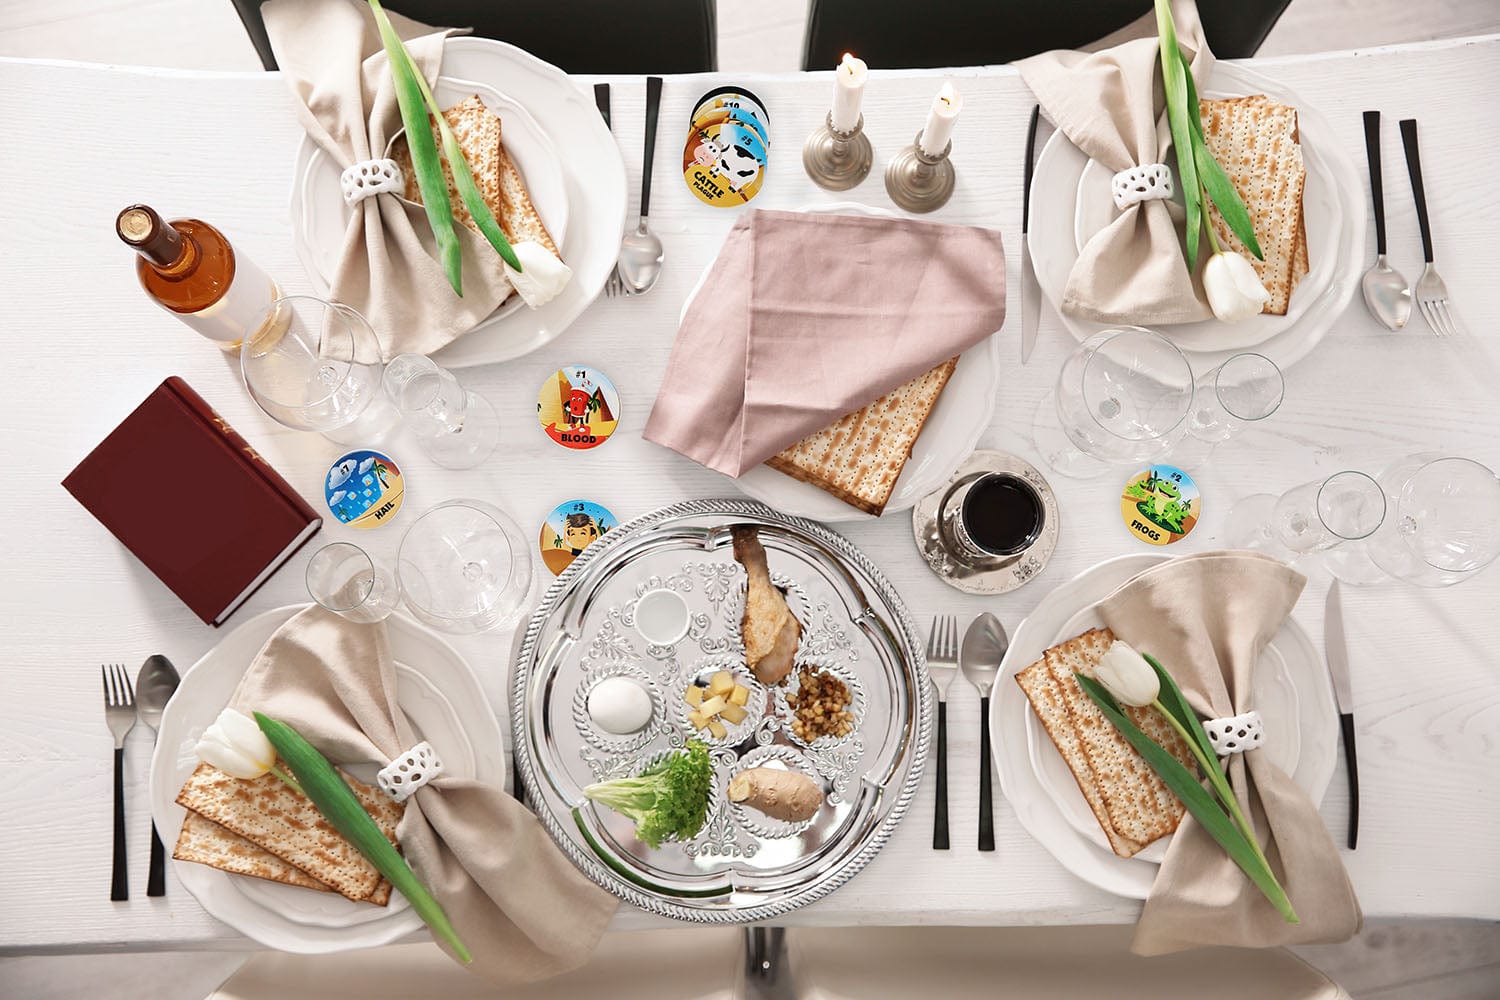 Rite Lite Placemat Passover Tablescatters - 2 Sets of 10 Plagues